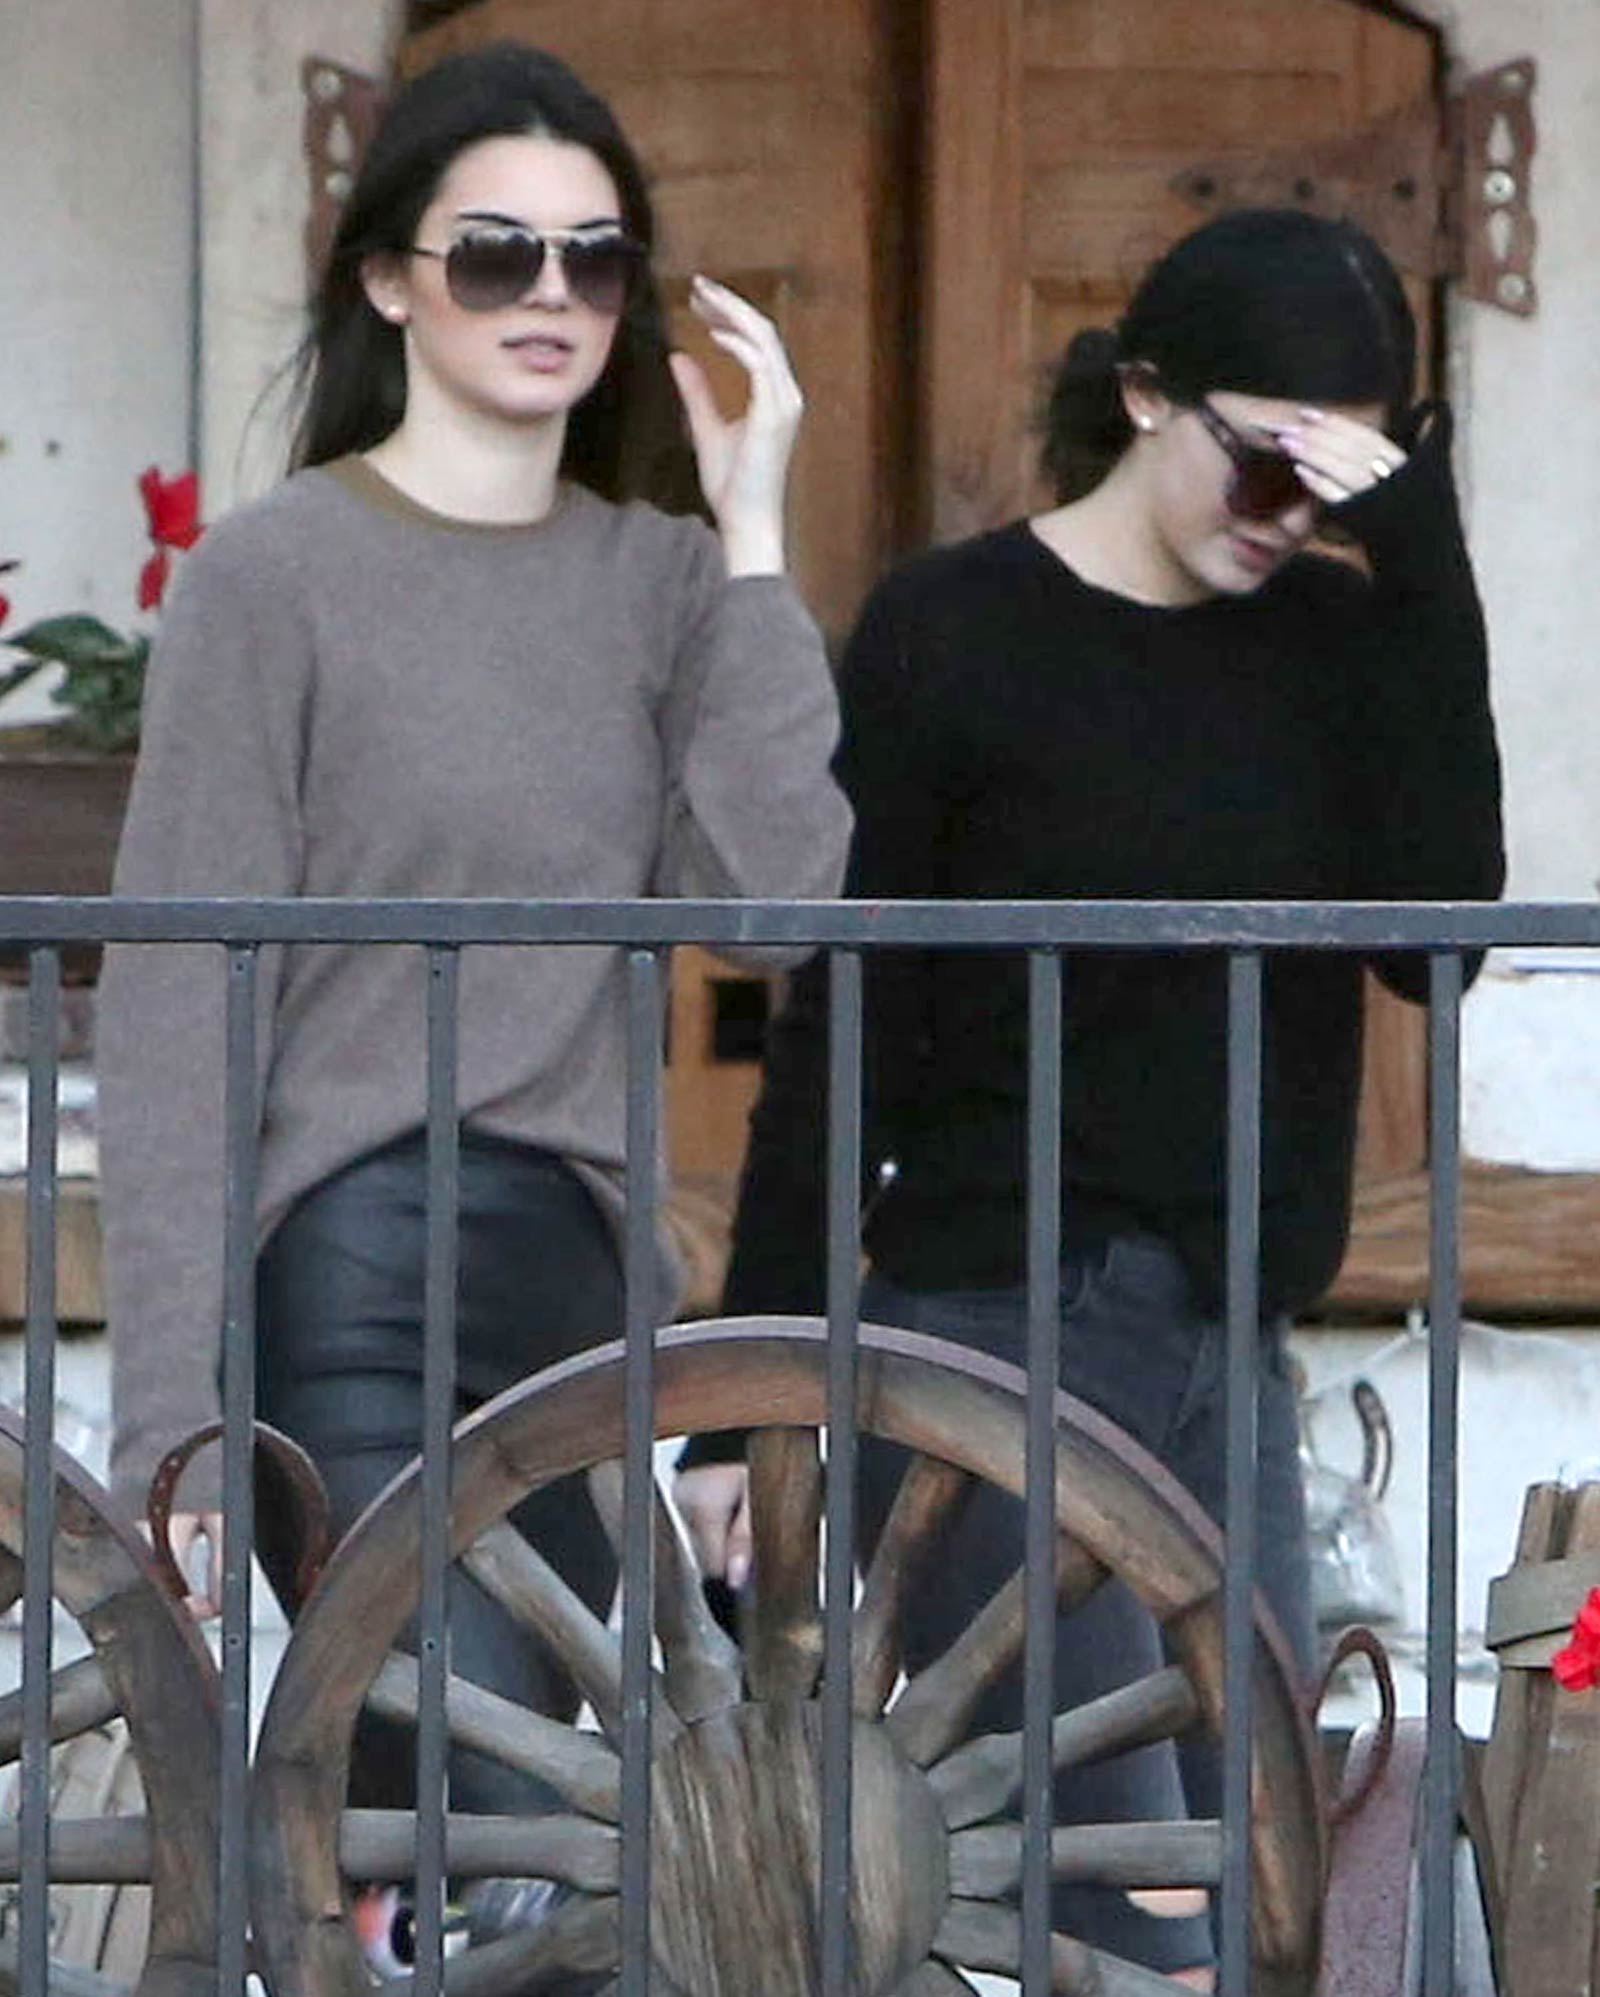 Kendall Jenner shopping in Beverly Hills